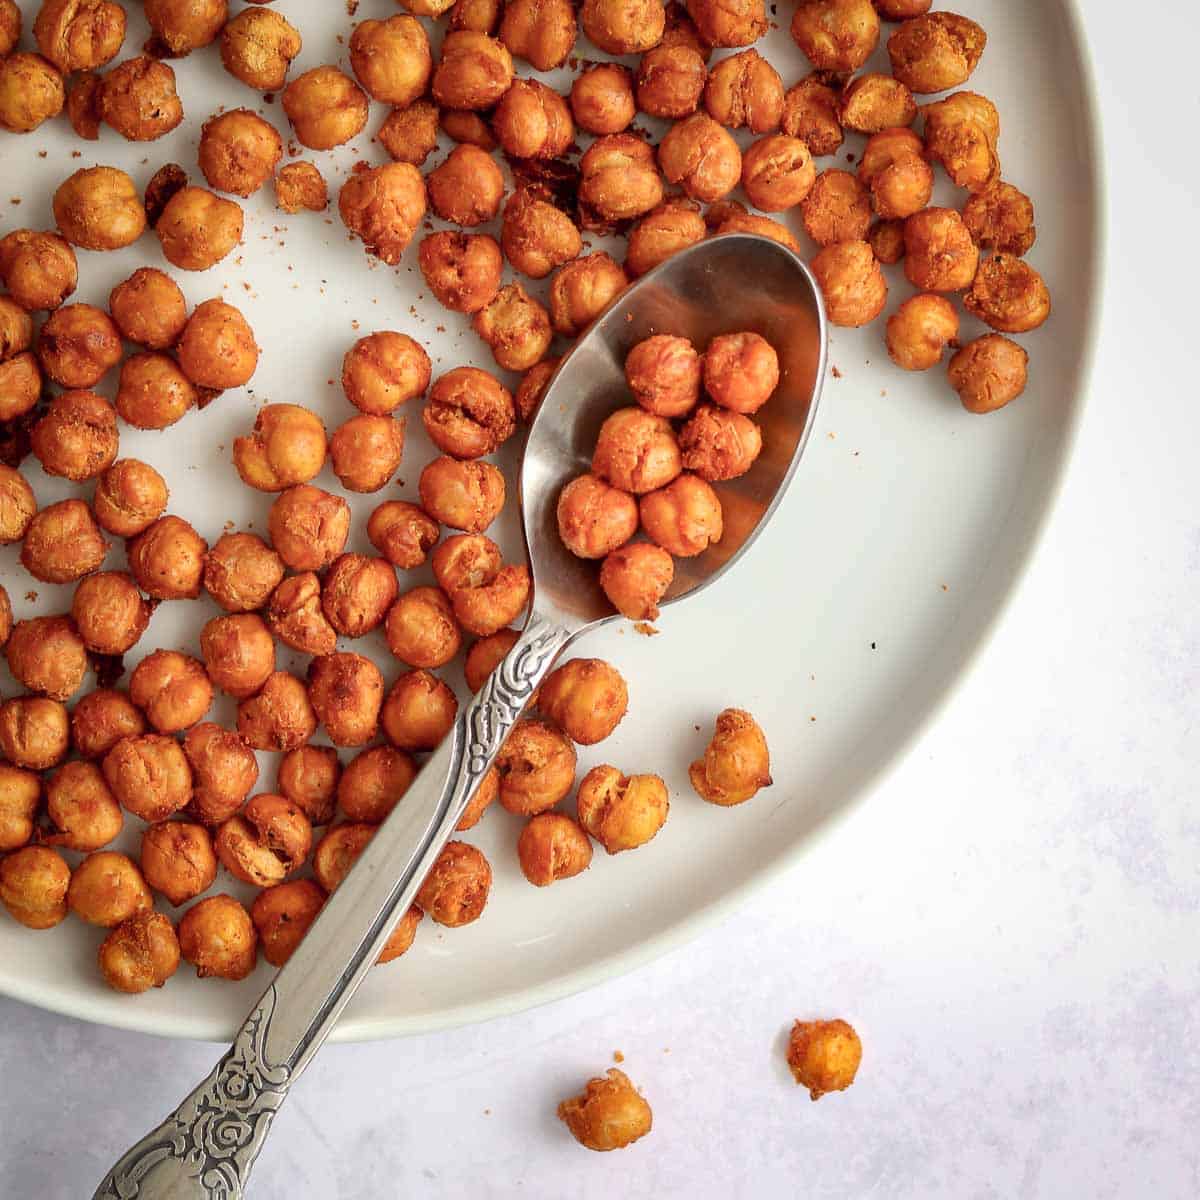 Overhead shot of crispy chickpeas on a white plate with a spoon holding some chickpeas on the side.